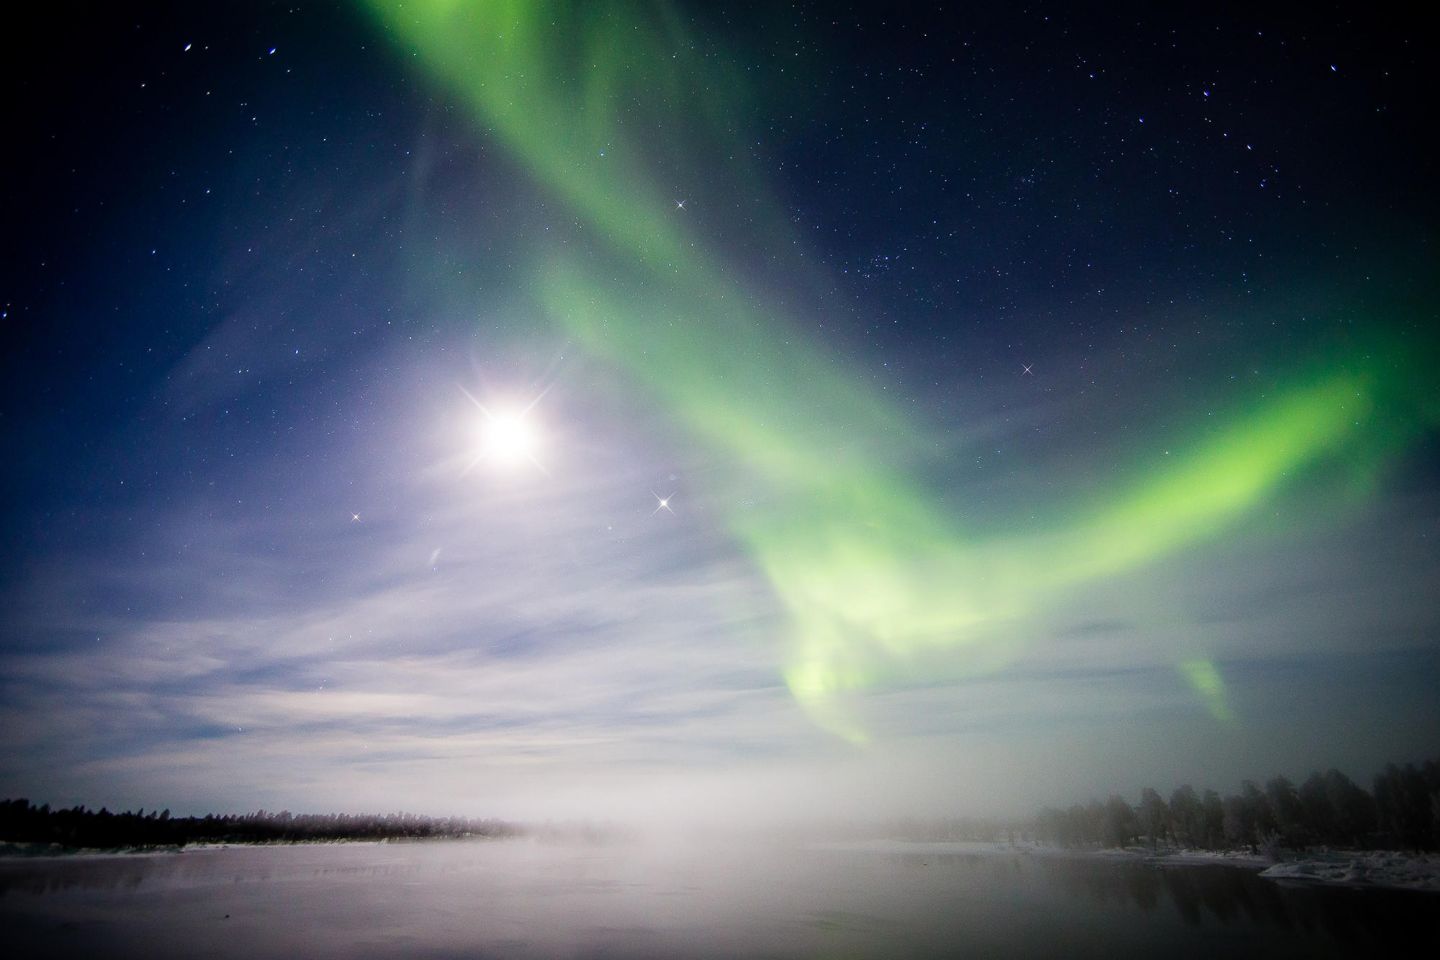 auroras and the night sky in Lapland